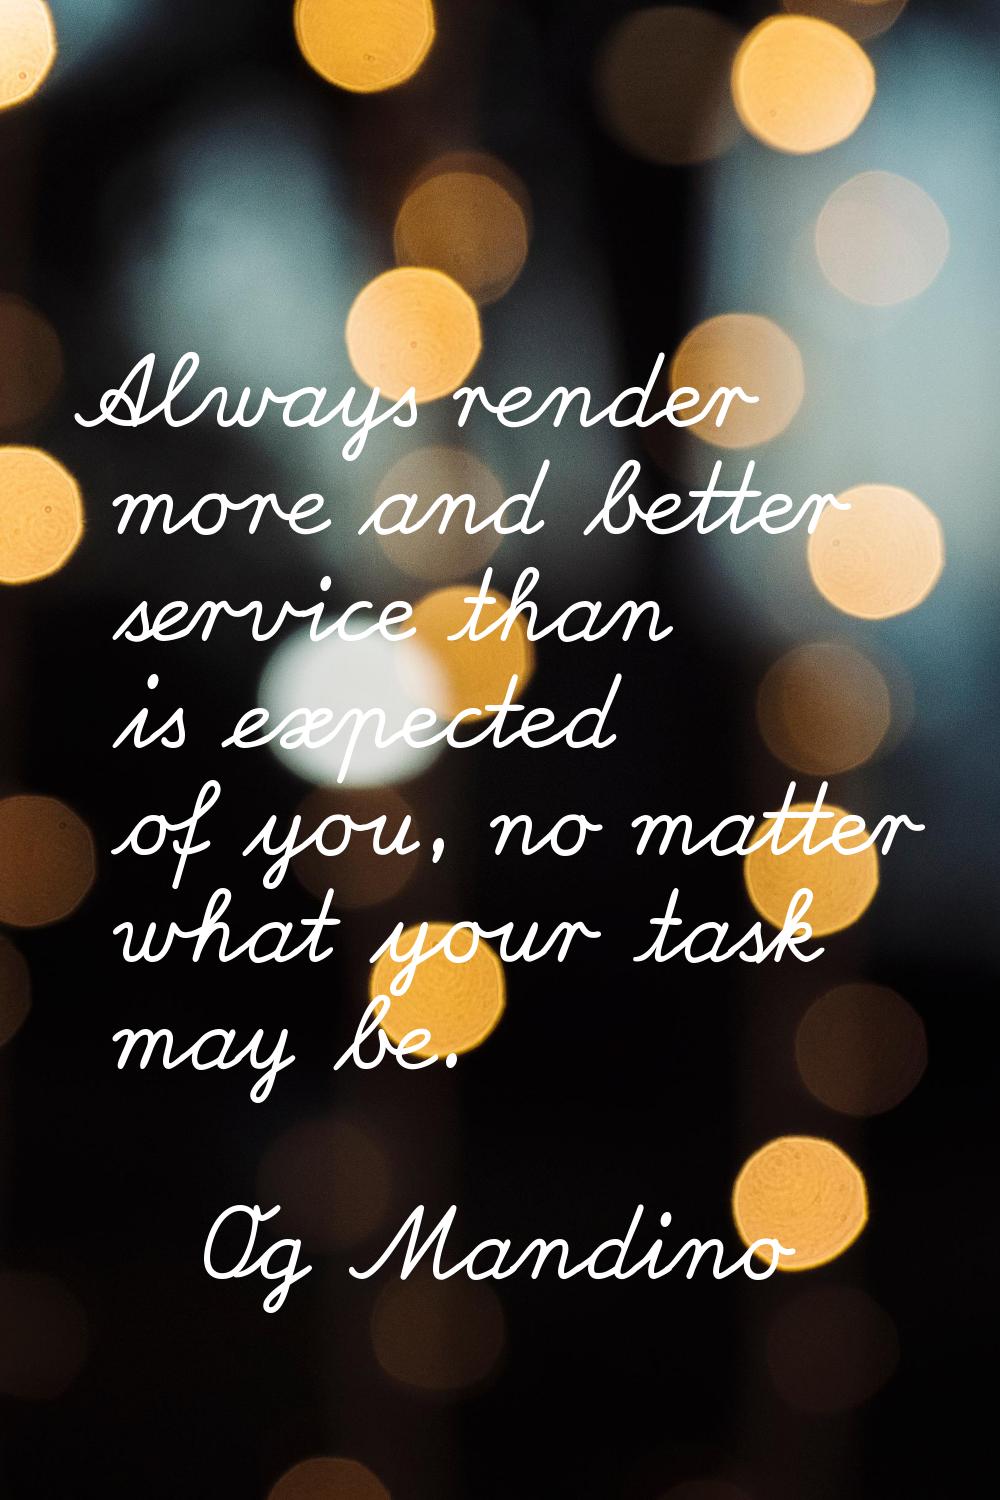 Always render more and better service than is expected of you, no matter what your task may be.